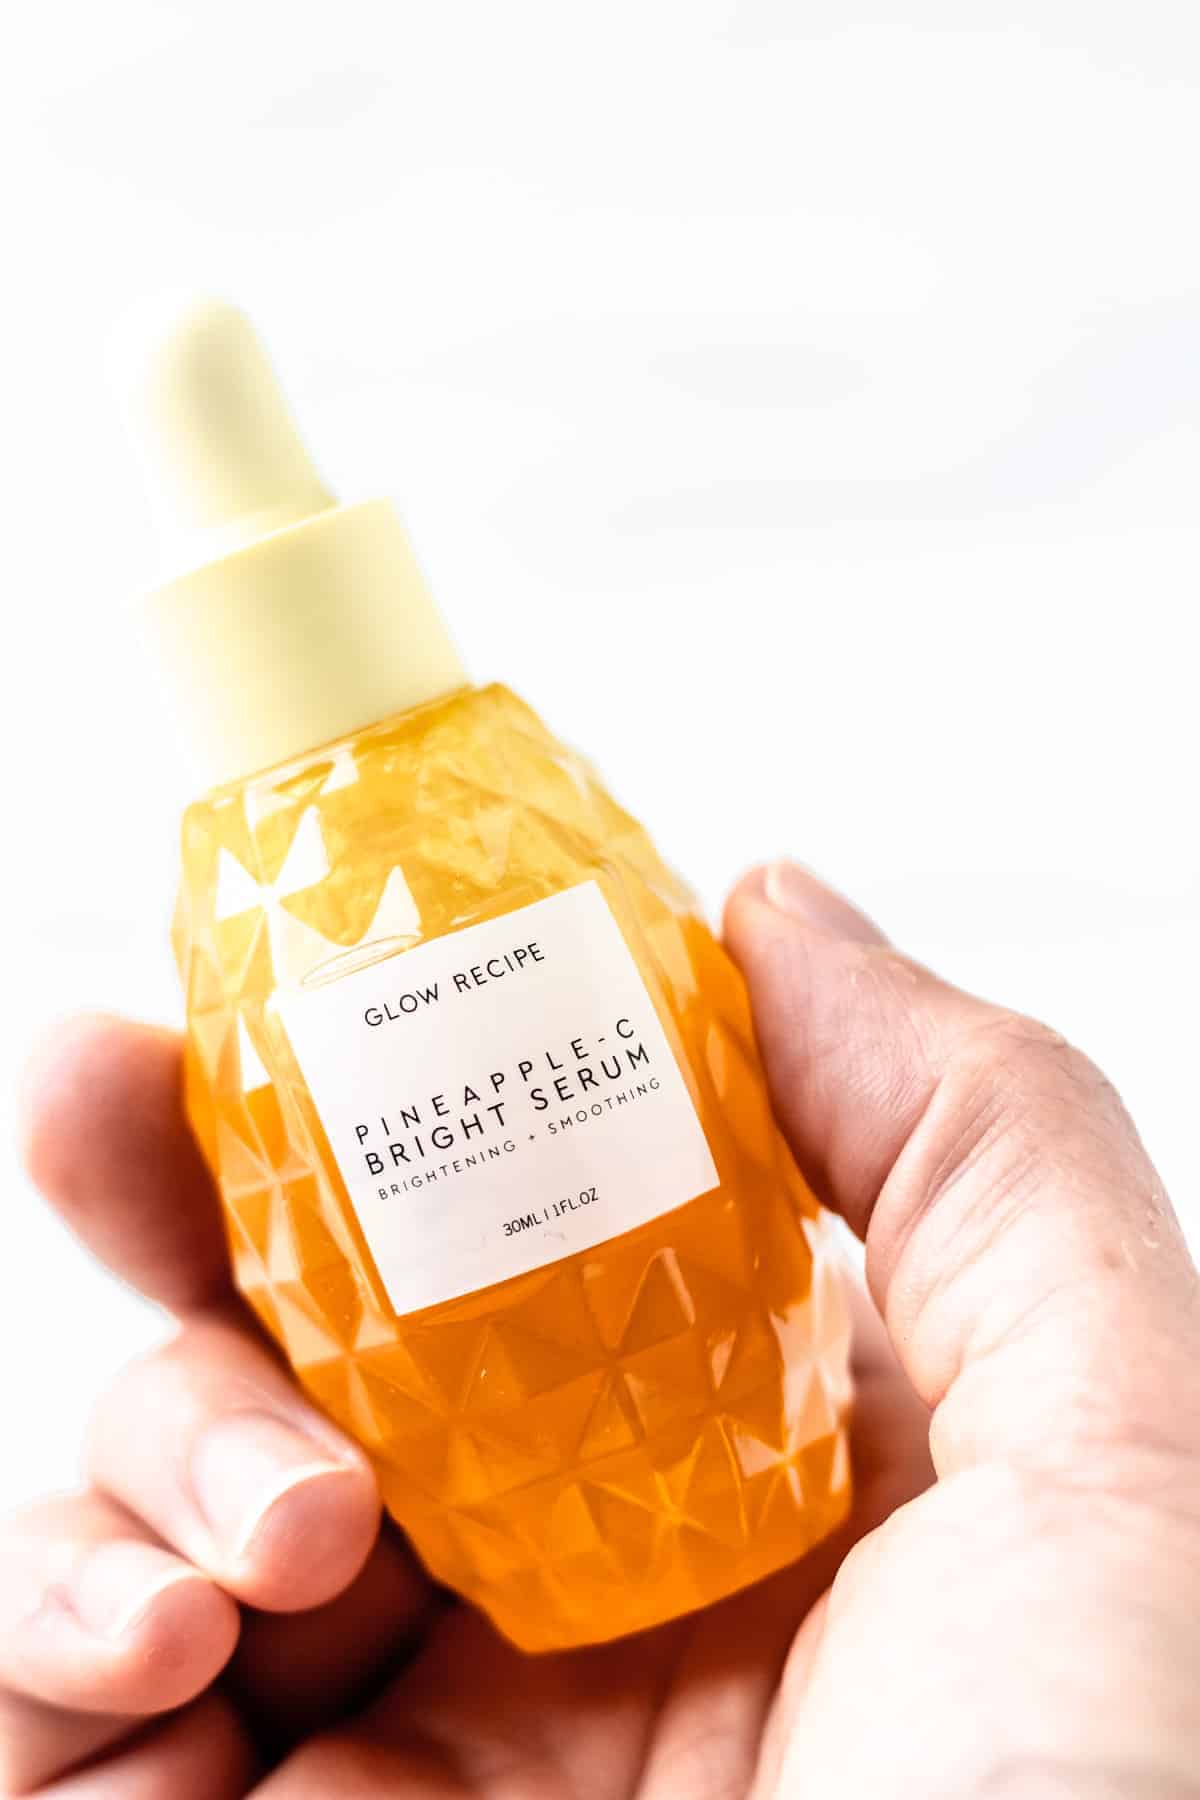 A hand holding a bottle of Glow Recipe Pineapple-C Bright Serum.